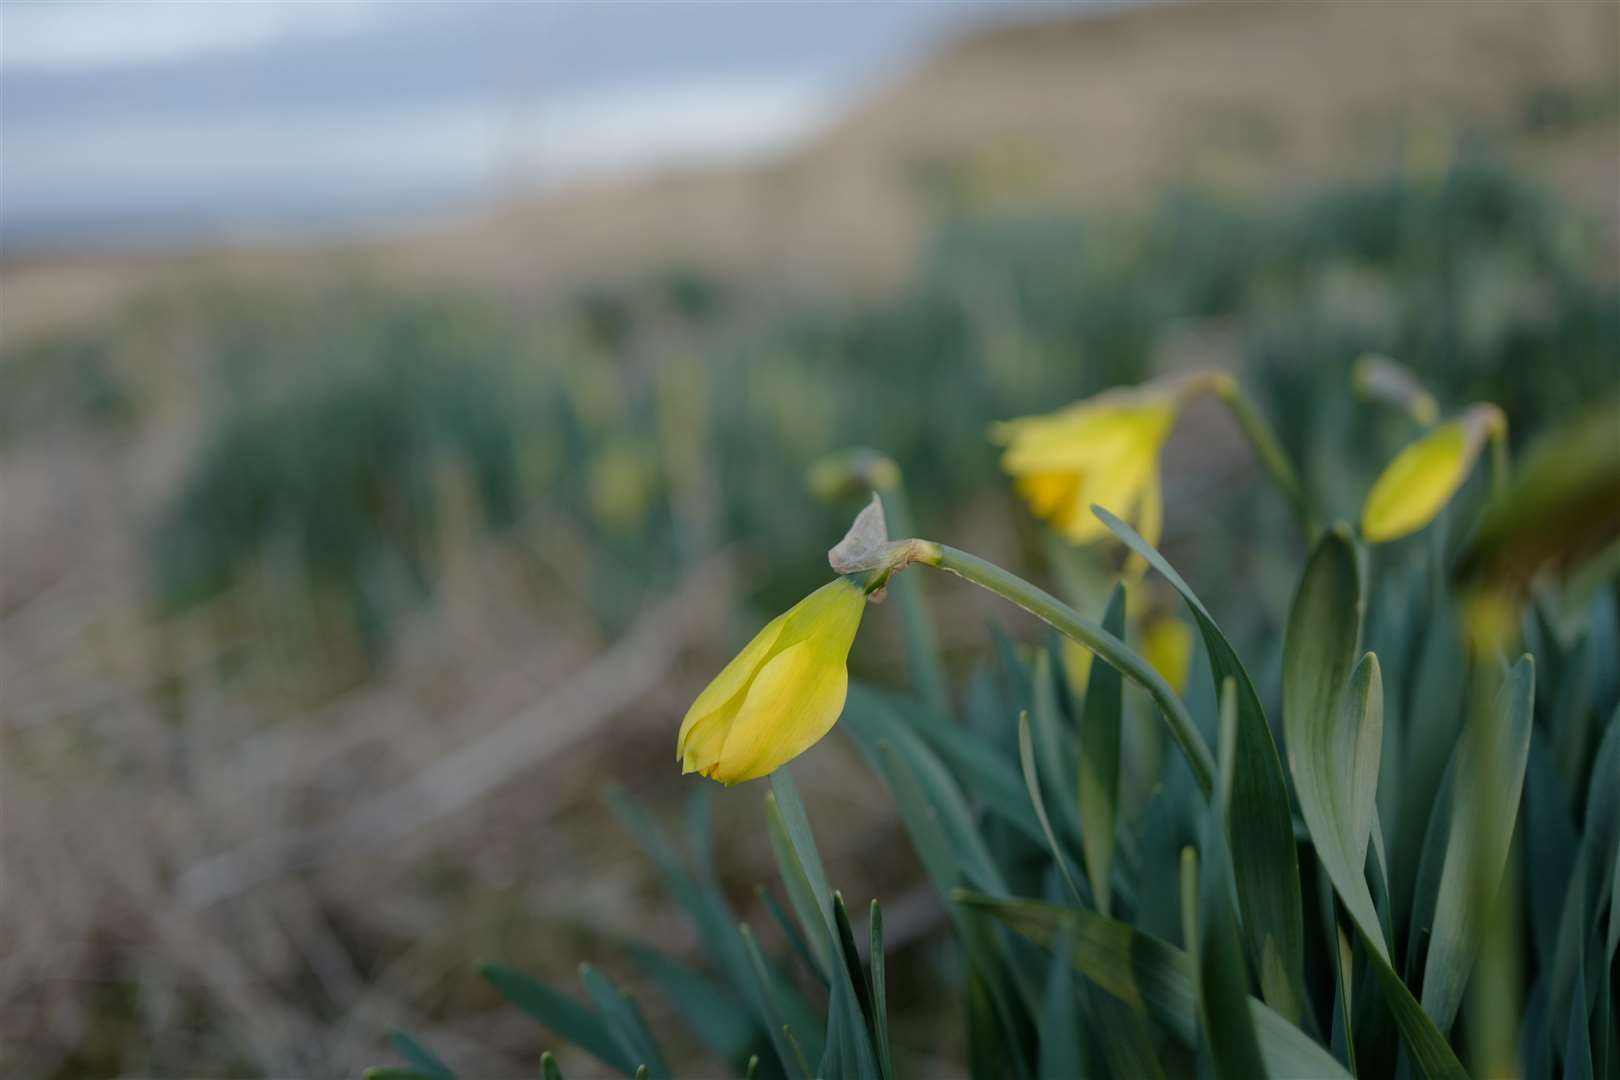 Some of the first emerging daffodils at Freswick this week.